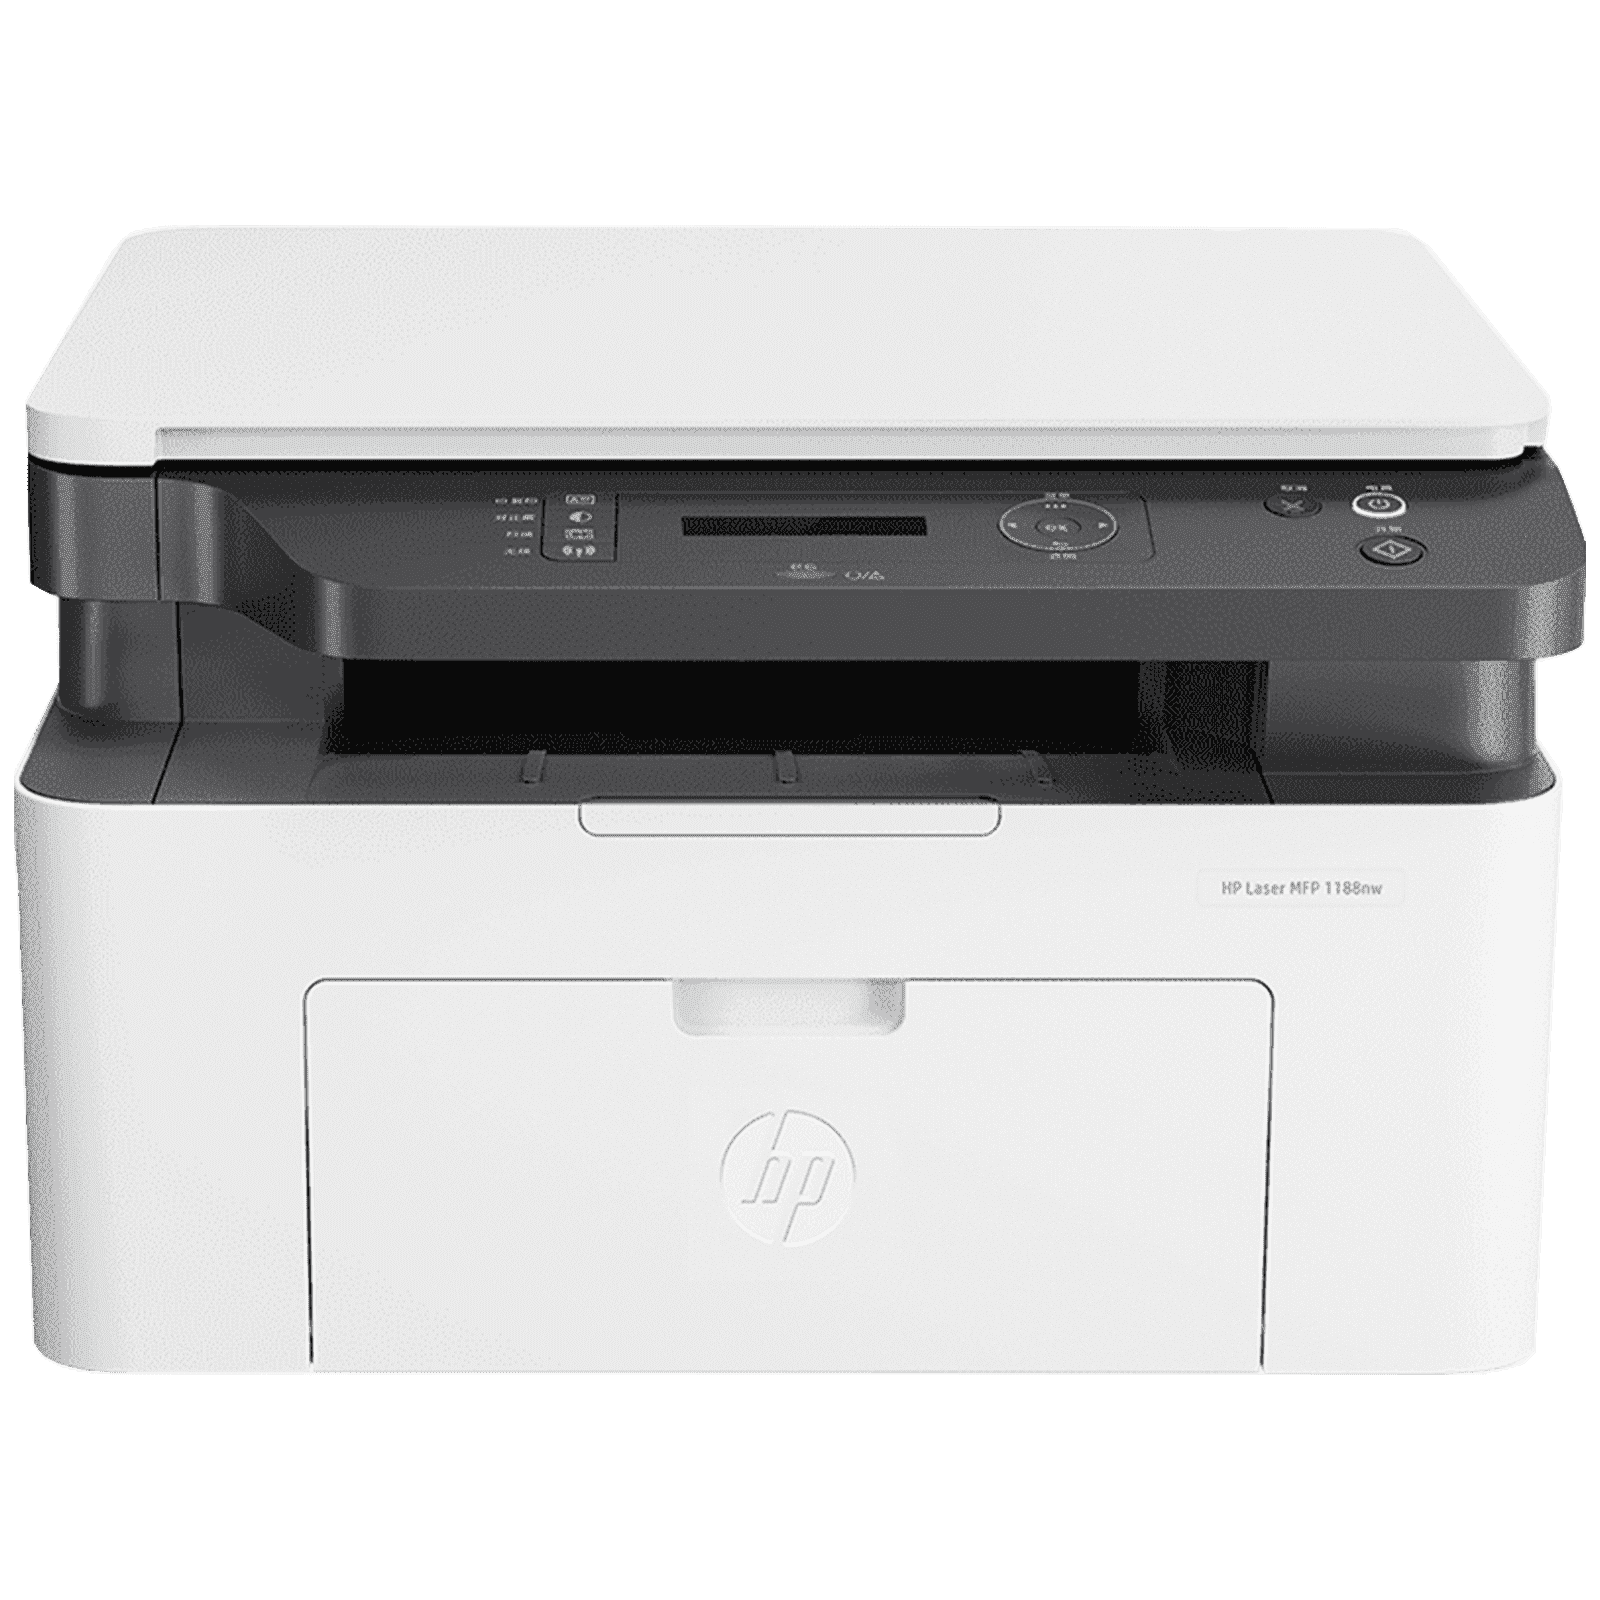 HP Laser MFP 1188nw Wireless Black and White Multi-Function Laserjet Printer (Manual Duplex Printing, 715A4A, White)